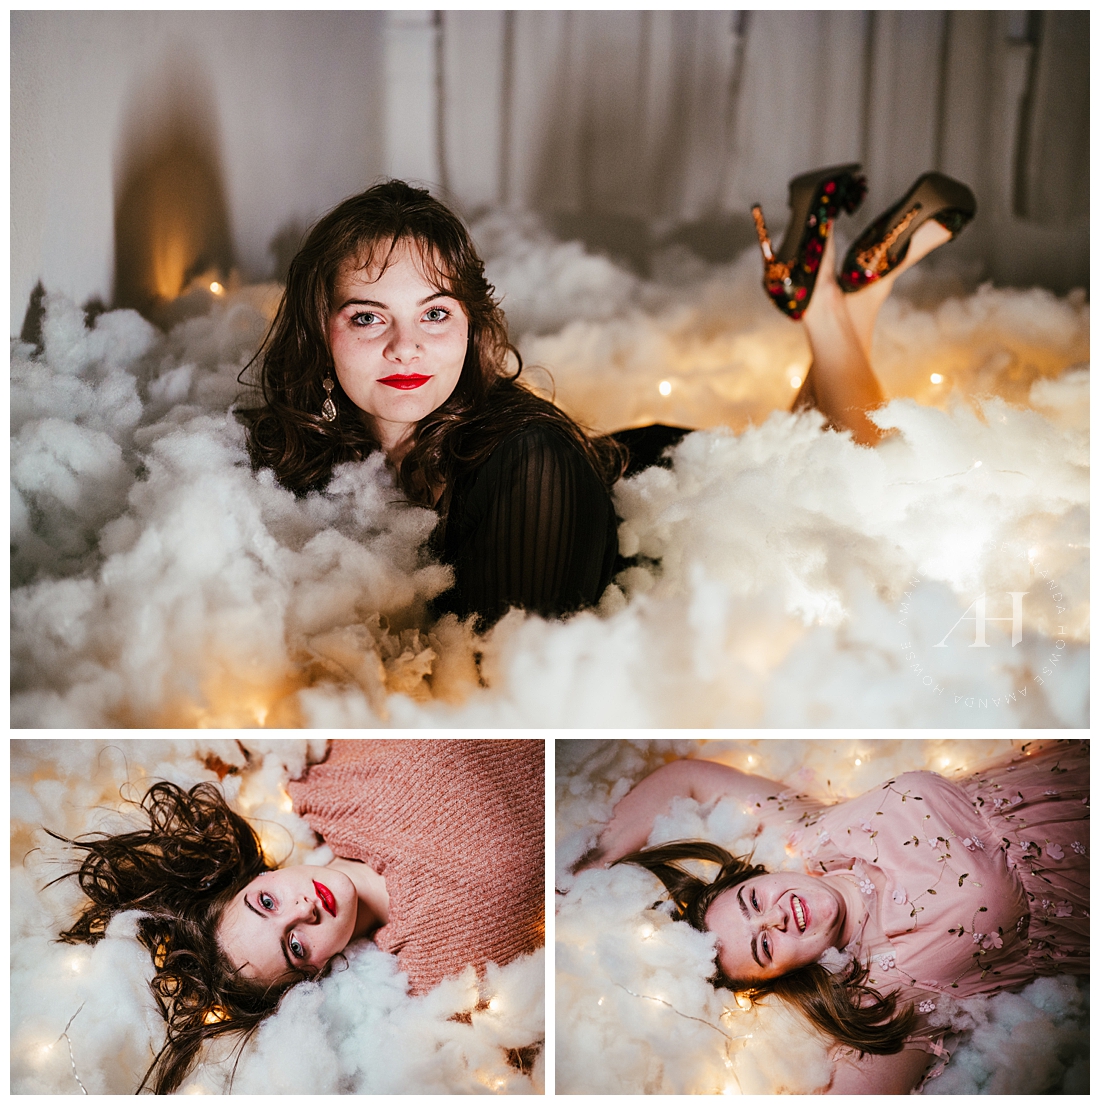 Midnights | Lights and Clouds Portraits at Studio253 | Amanda Howse Photography